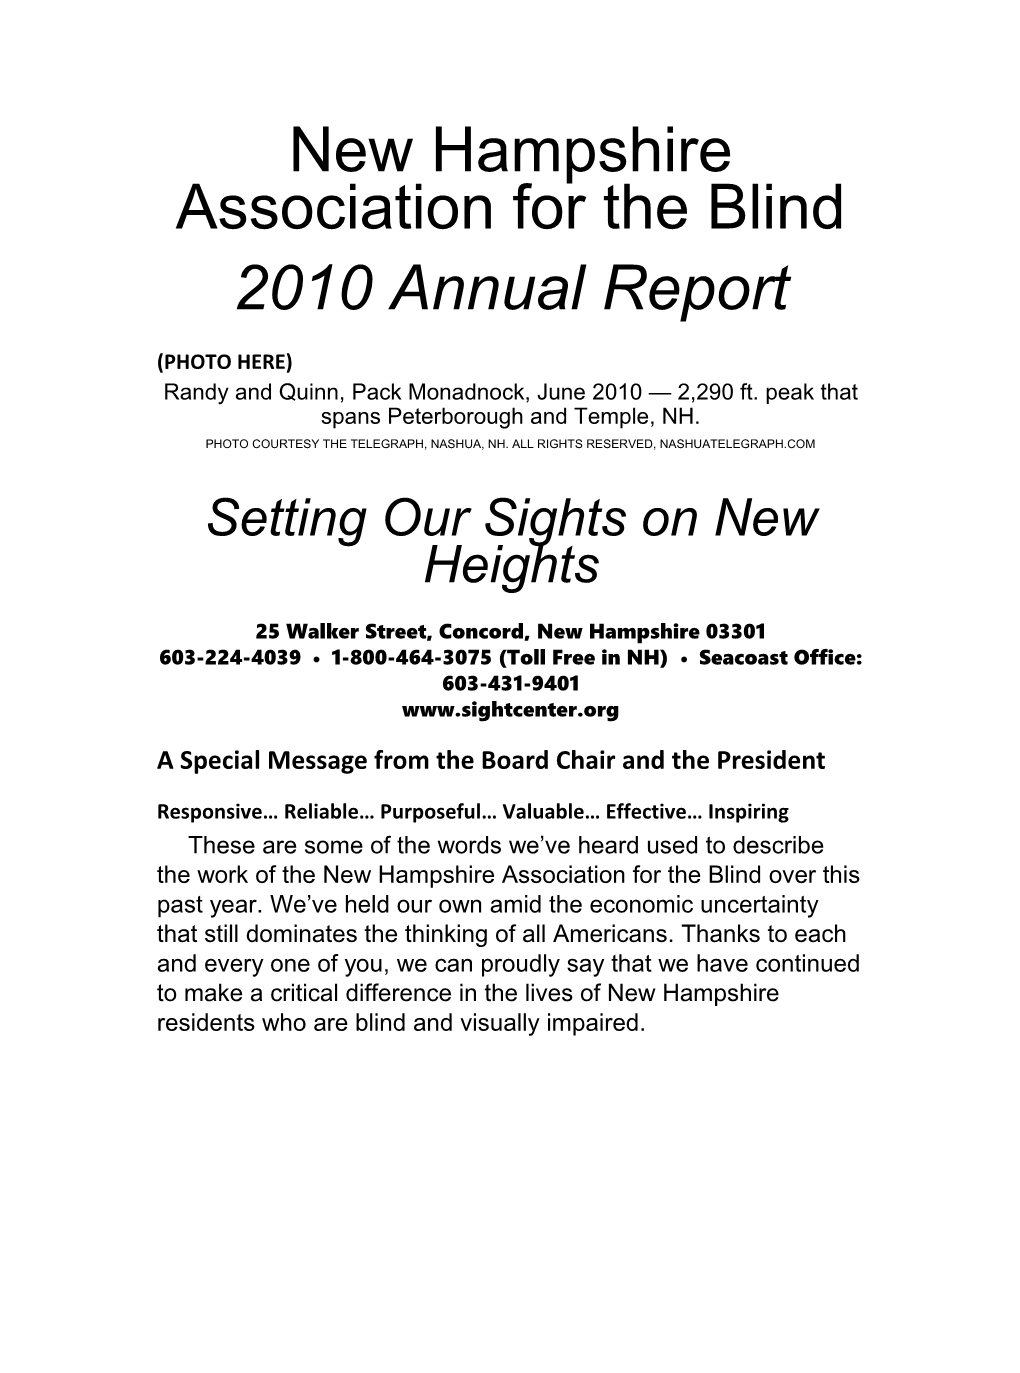 New Hampshire Association for the Blind